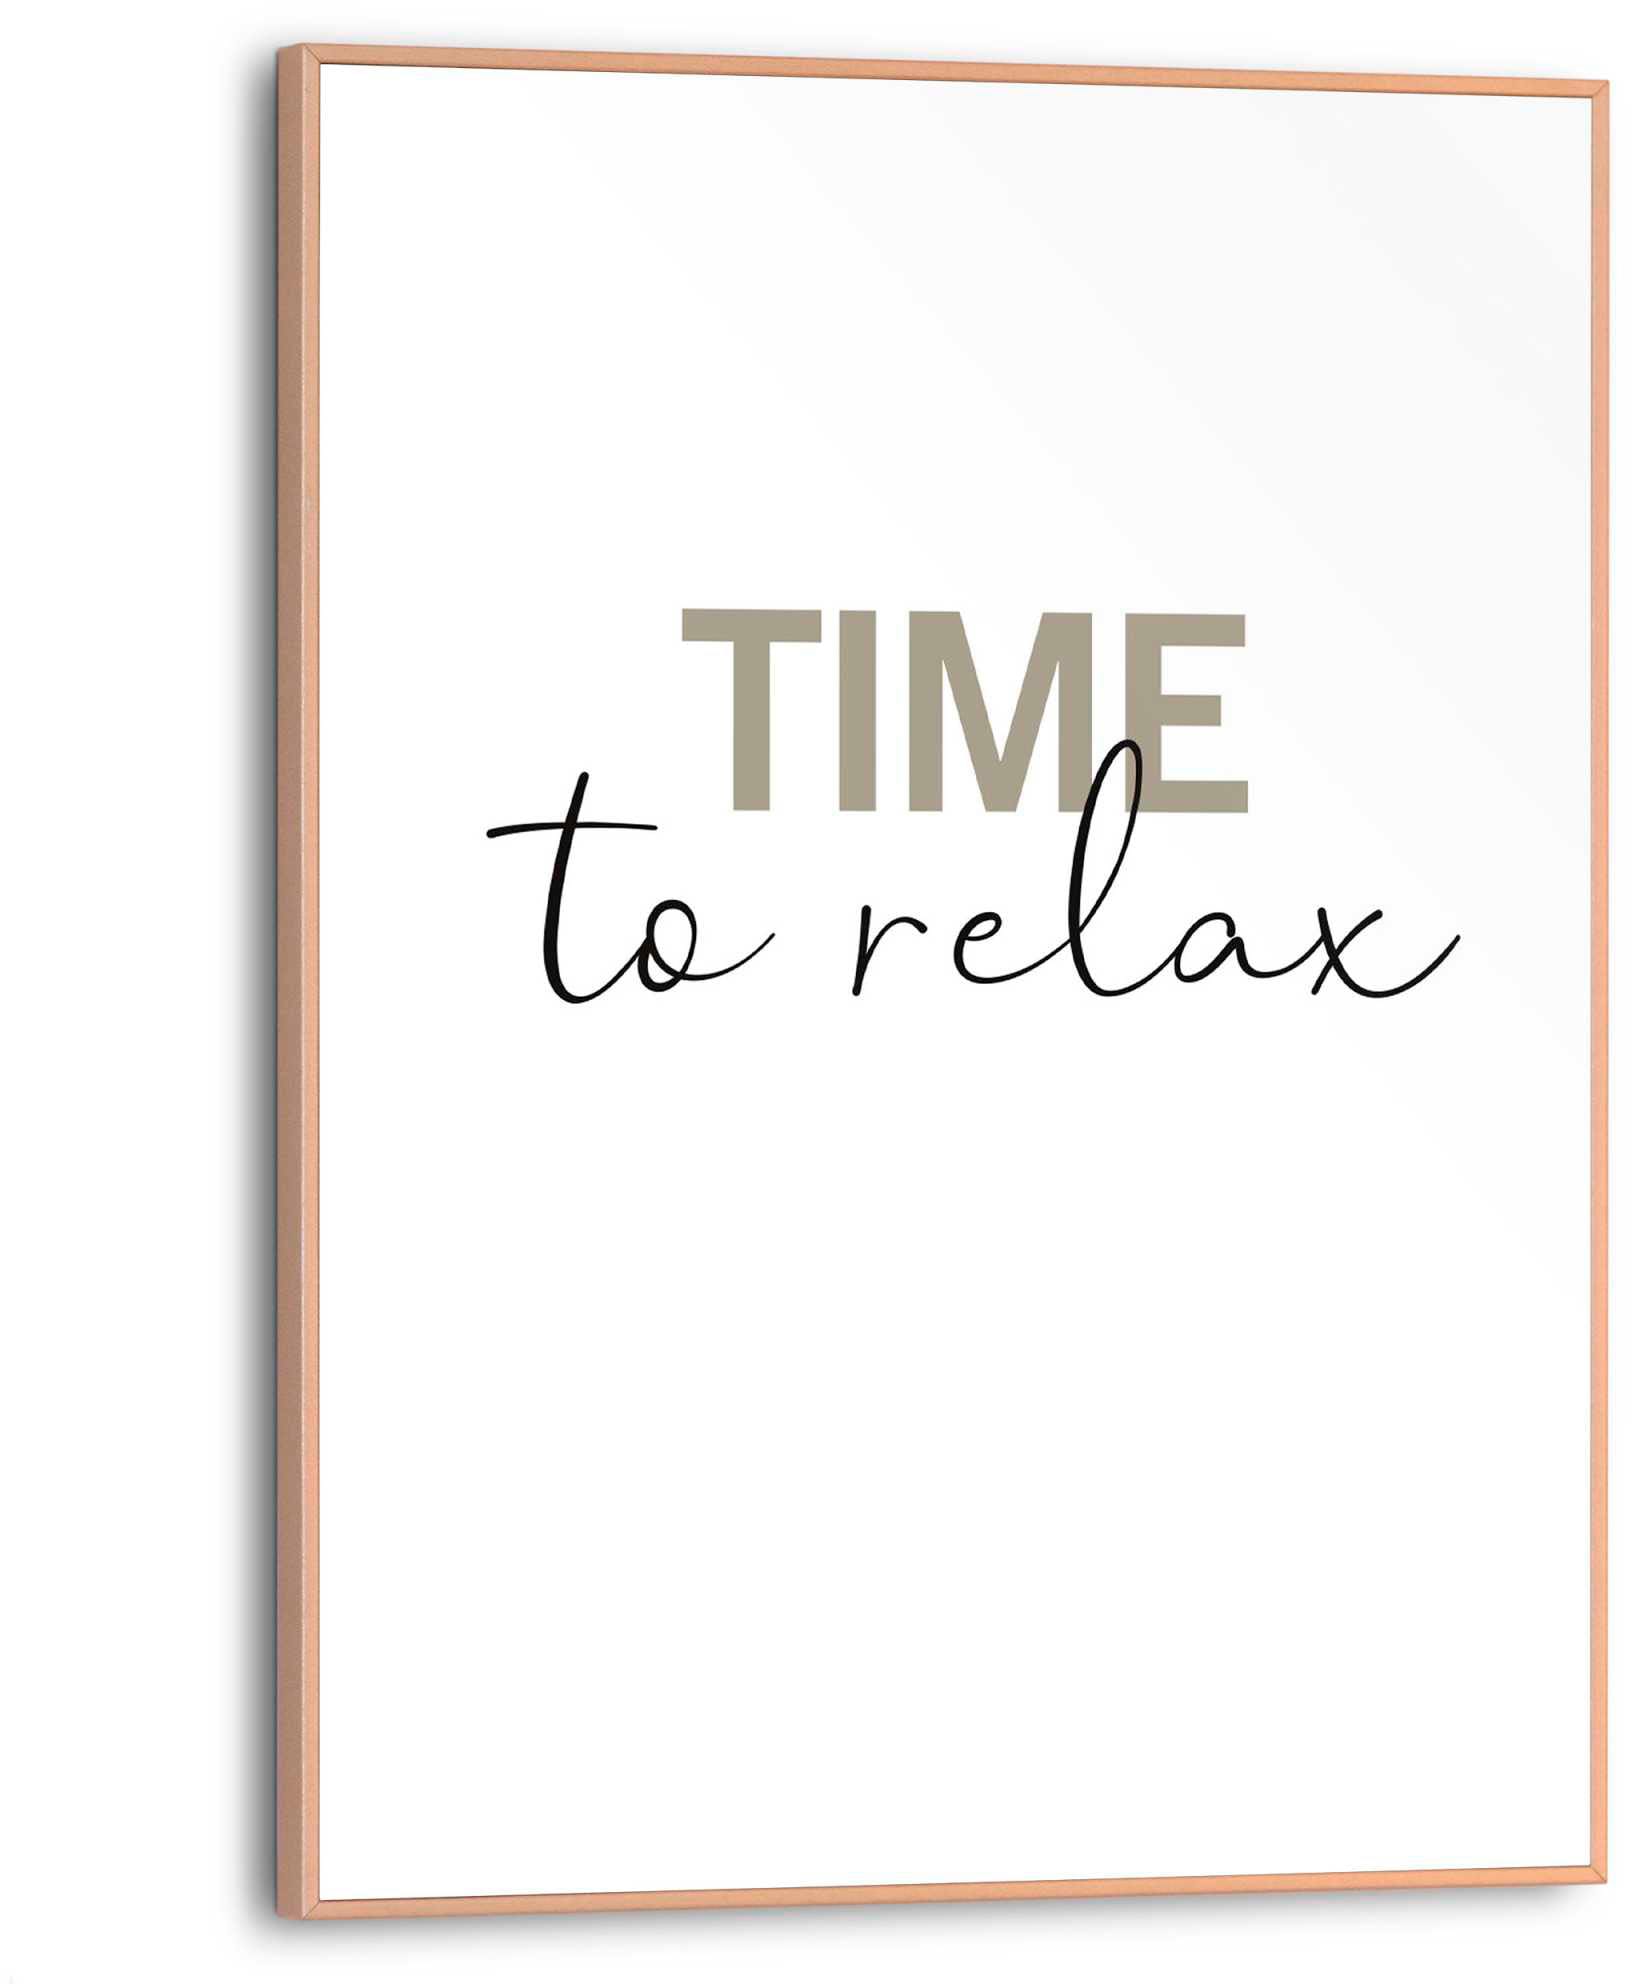 to OTTO Reinders! bei kaufen relax« Poster »Time